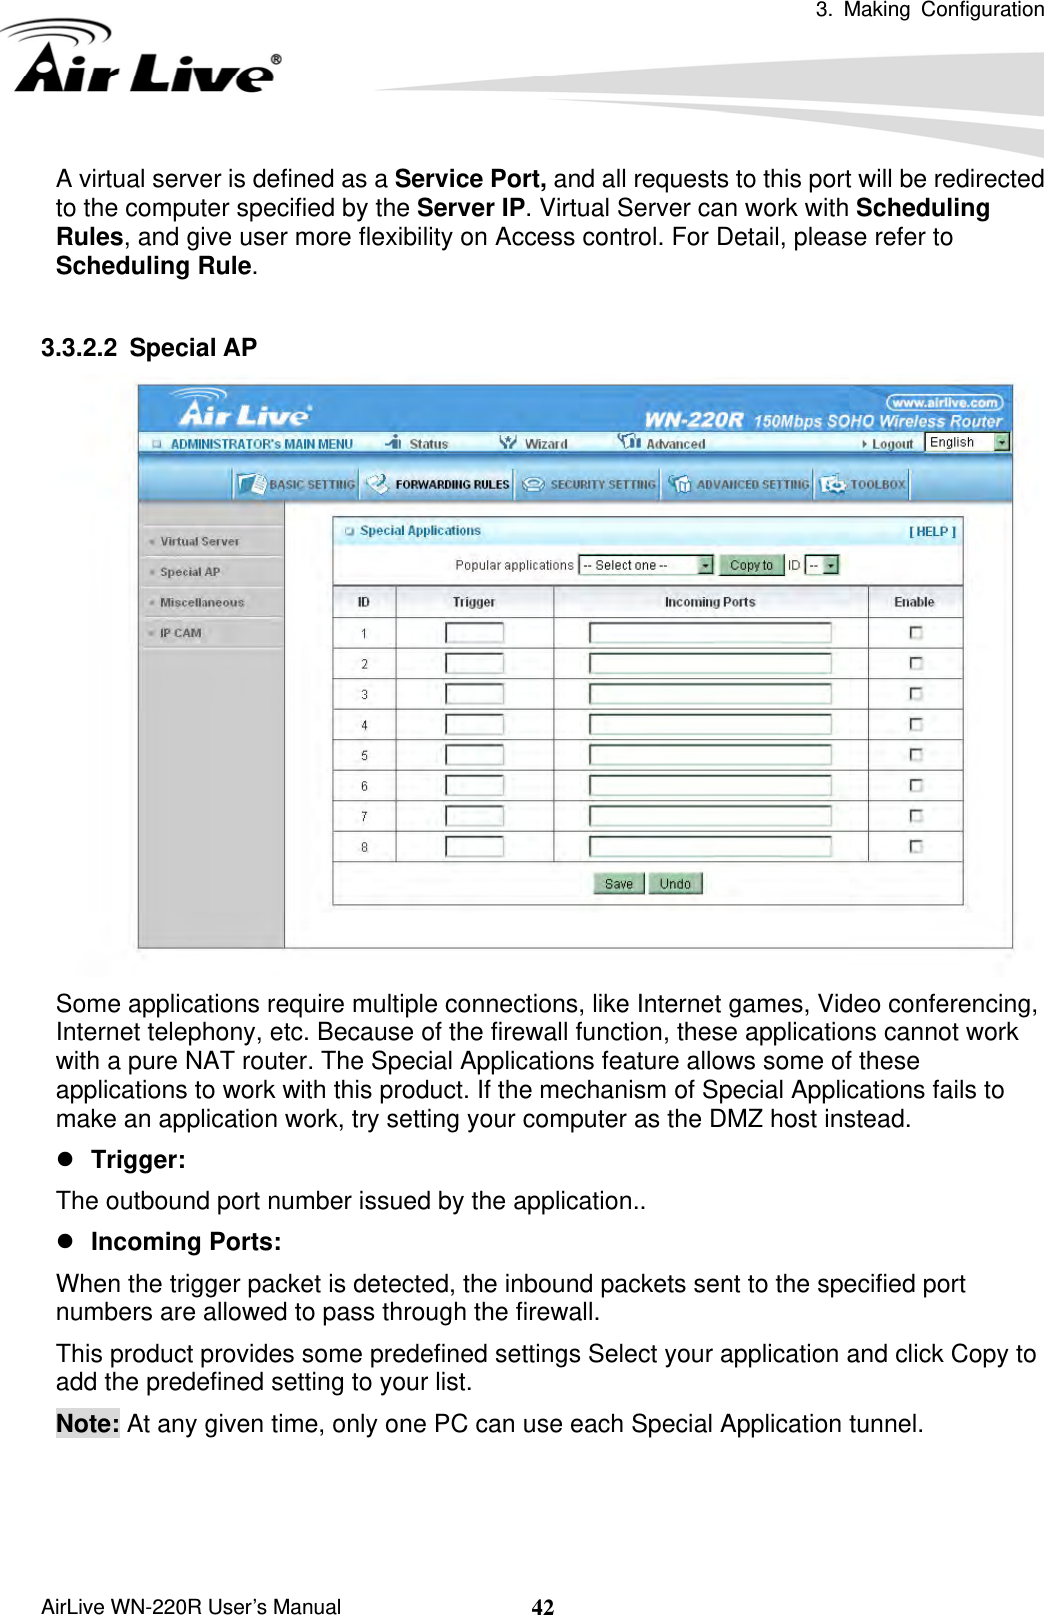  3. Making Configuration       AirLive WN-220R User’s Manual  42A virtual server is defined as a Service Port, and all requests to this port will be redirected to the computer specified by the Server IP. Virtual Server can work with Scheduling Rules, and give user more flexibility on Access control. For Detail, please refer to Scheduling Rule.  3.3.2.2 Special AP  Some applications require multiple connections, like Internet games, Video conferencing, Internet telephony, etc. Because of the firewall function, these applications cannot work with a pure NAT router. The Special Applications feature allows some of these applications to work with this product. If the mechanism of Special Applications fails to make an application work, try setting your computer as the DMZ host instead. z Trigger:  The outbound port number issued by the application.. z Incoming Ports:   When the trigger packet is detected, the inbound packets sent to the specified port numbers are allowed to pass through the firewall. This product provides some predefined settings Select your application and click Copy to add the predefined setting to your list. Note: At any given time, only one PC can use each Special Application tunnel.    